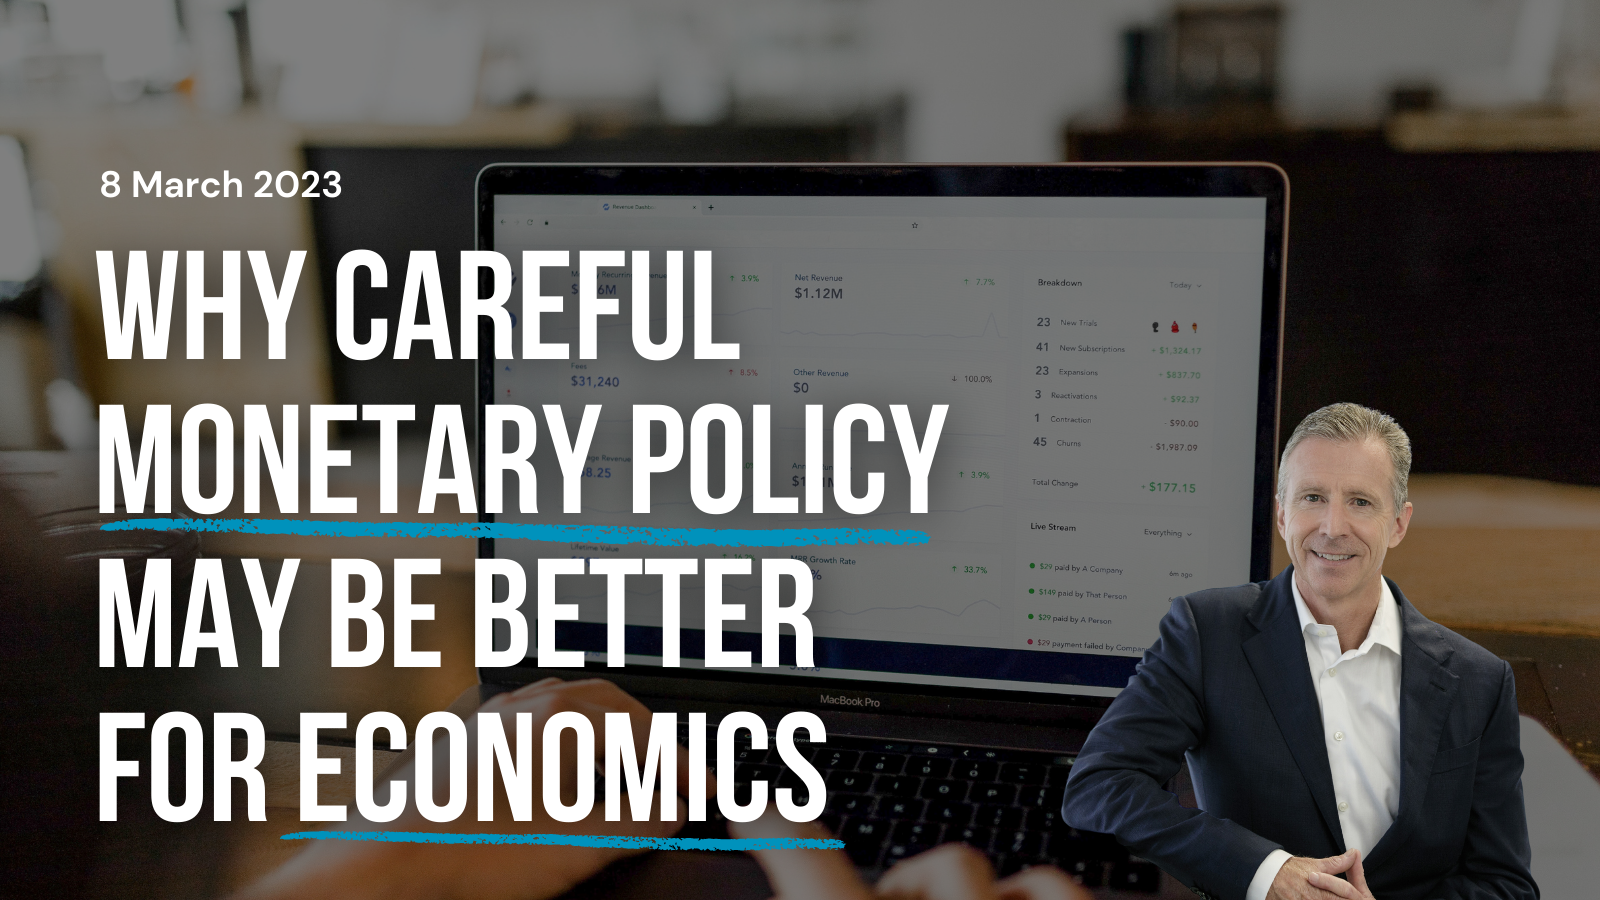 31. monetary policy better for economics